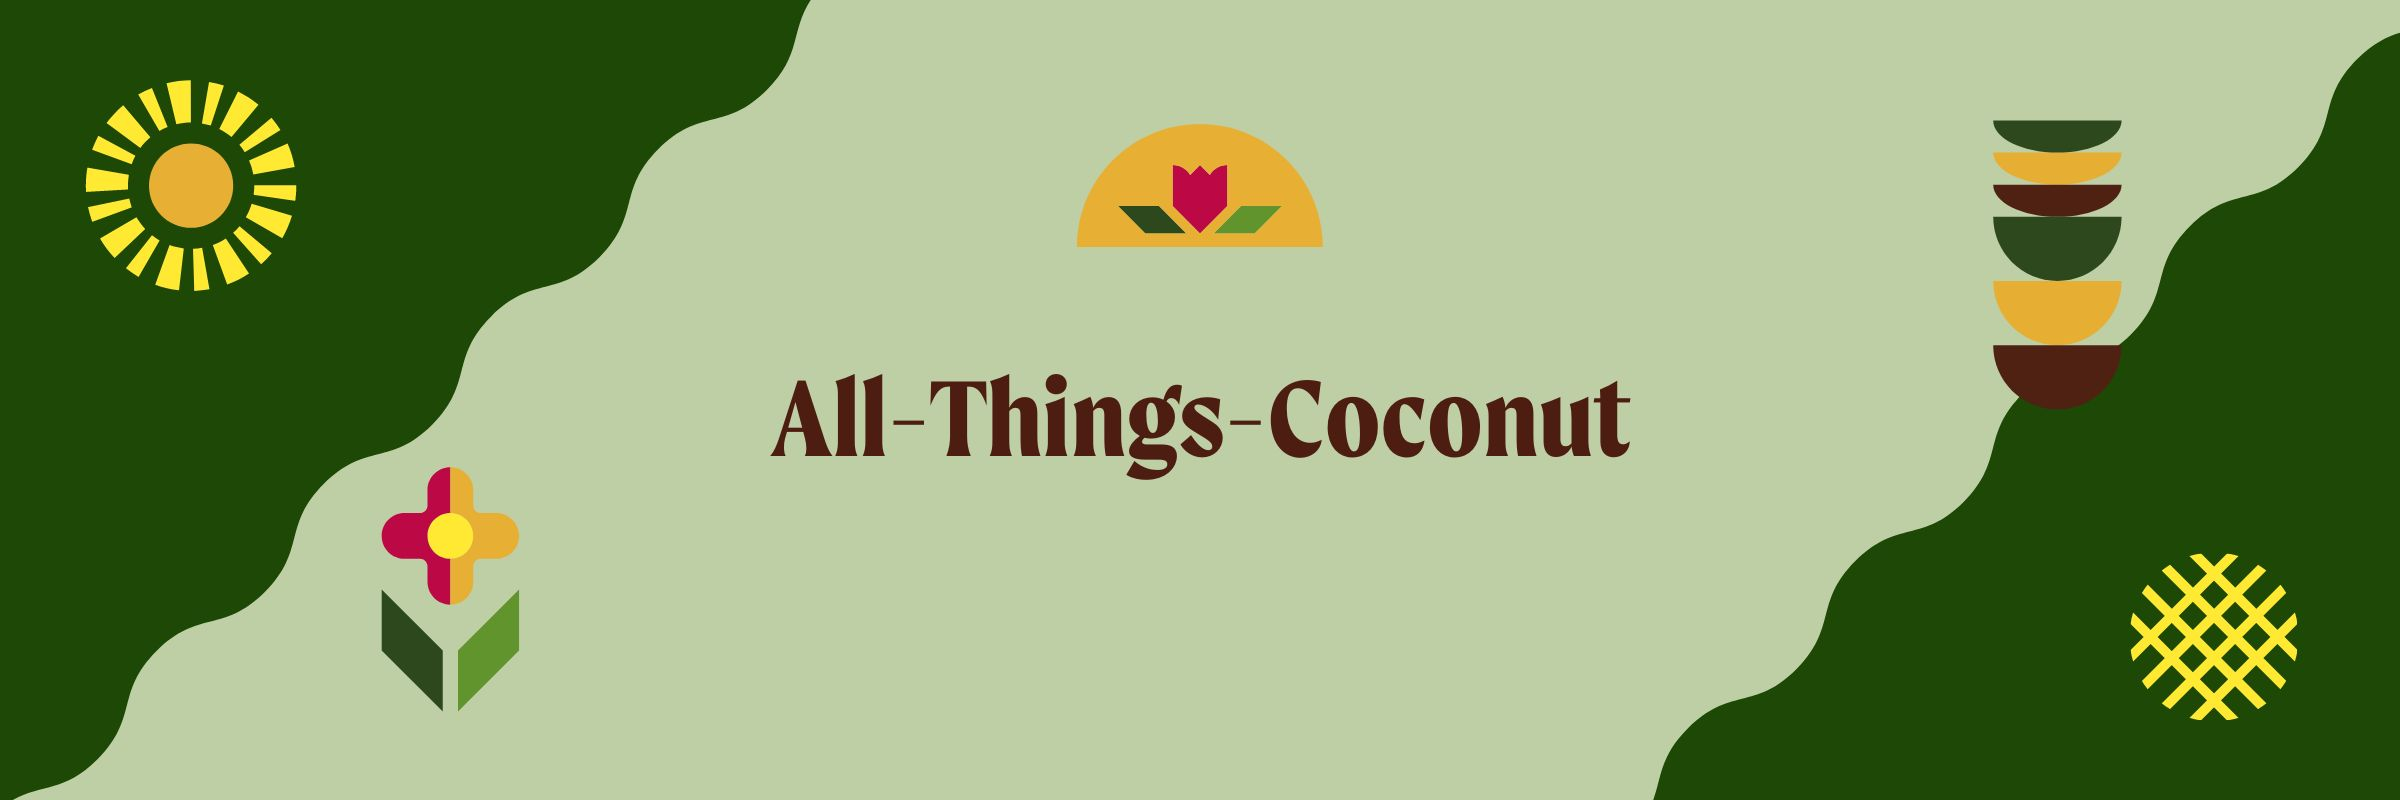 All-Things-Coconut